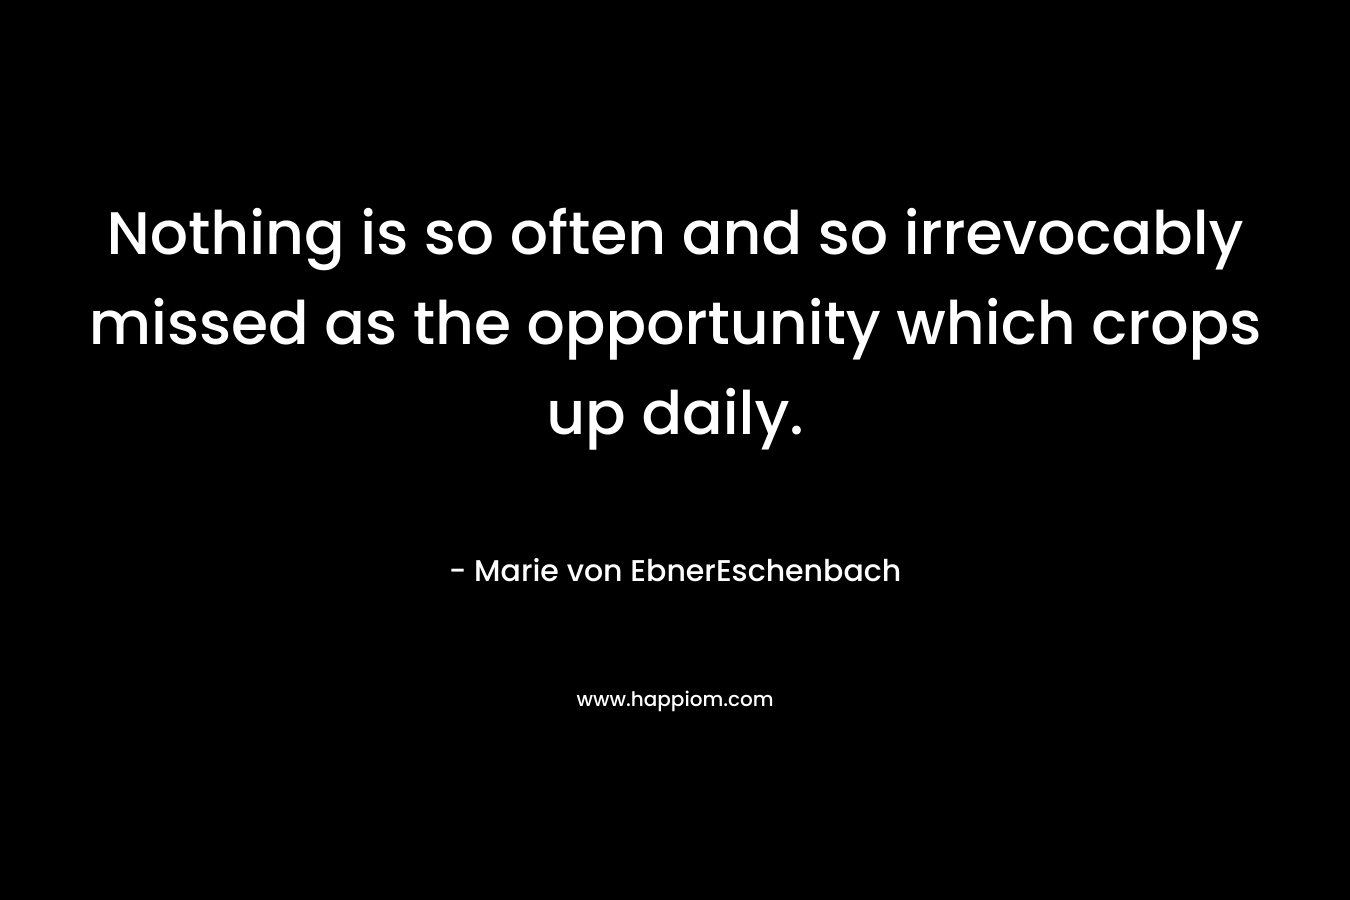 Nothing is so often and so irrevocably missed as the opportunity which crops up daily. – Marie von EbnerEschenbach